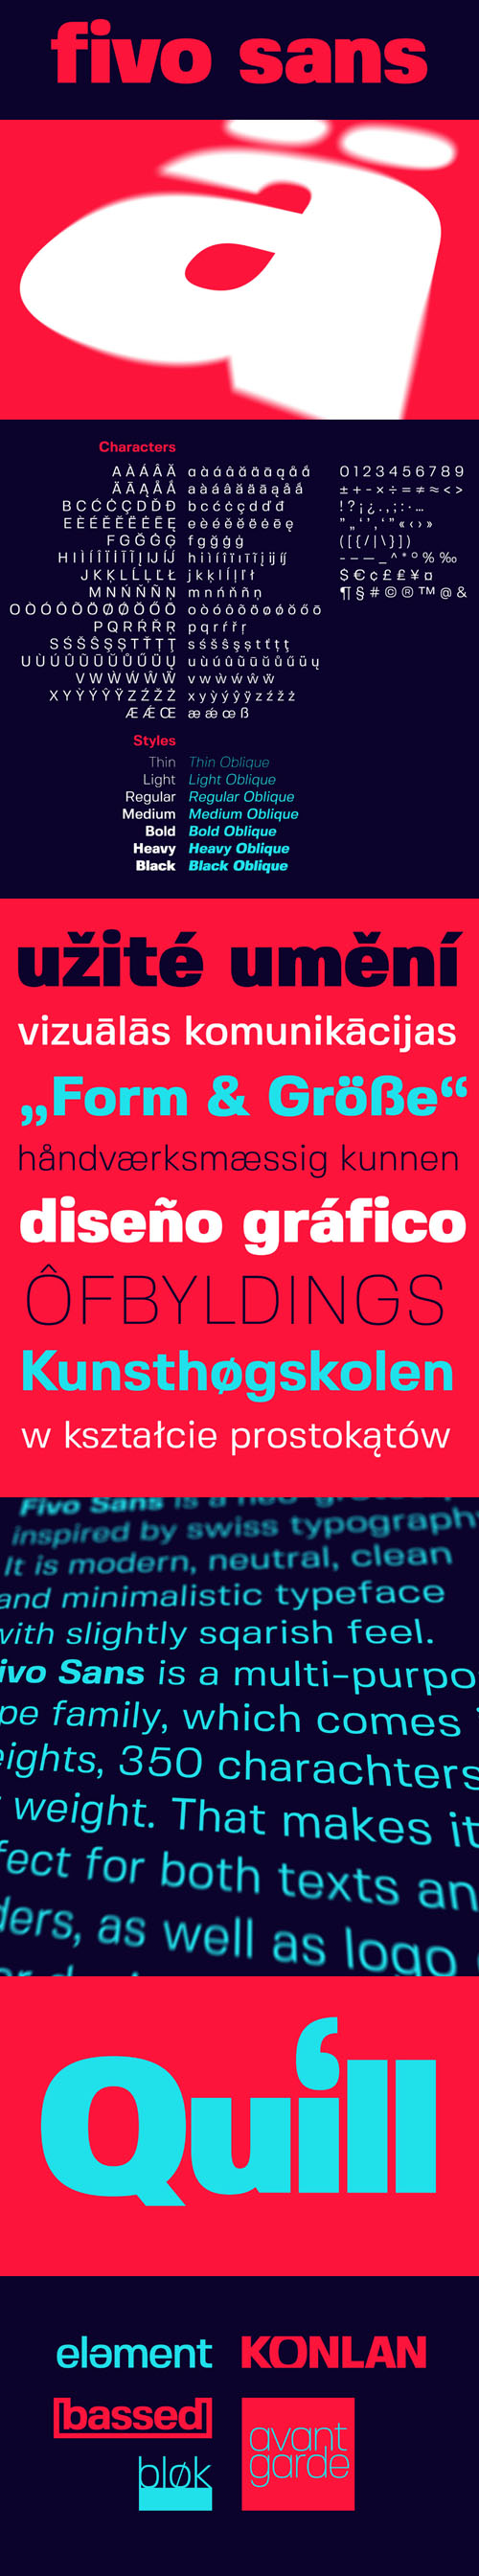 Fivo Sans Font Family - 14 Weights